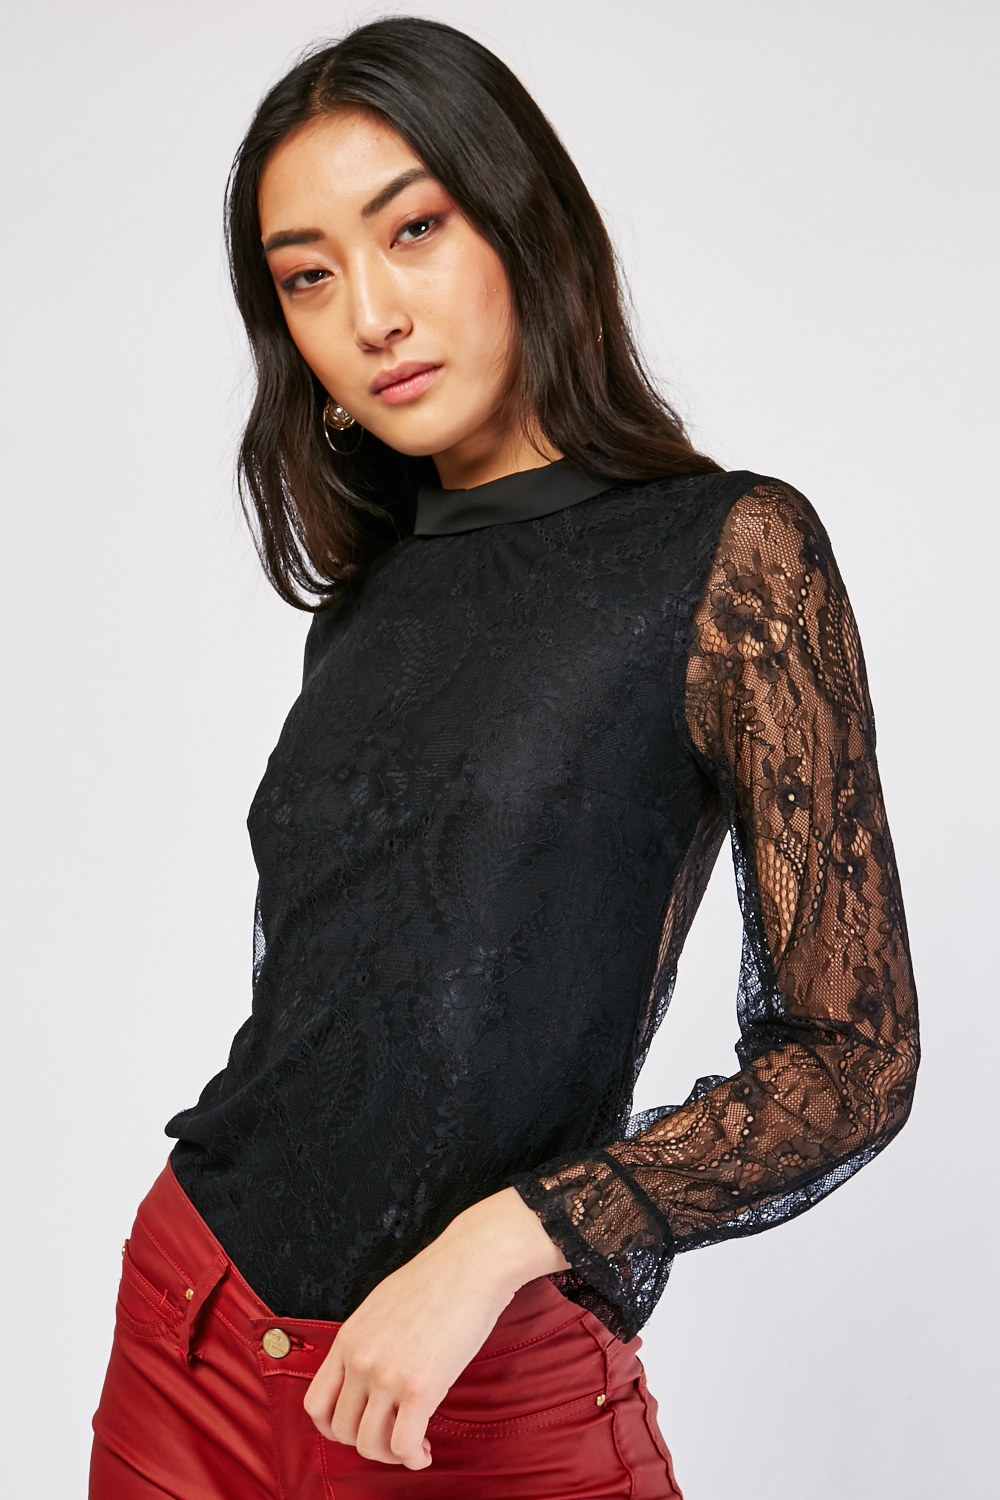 Lace Overlay Contrast Top - Just $3